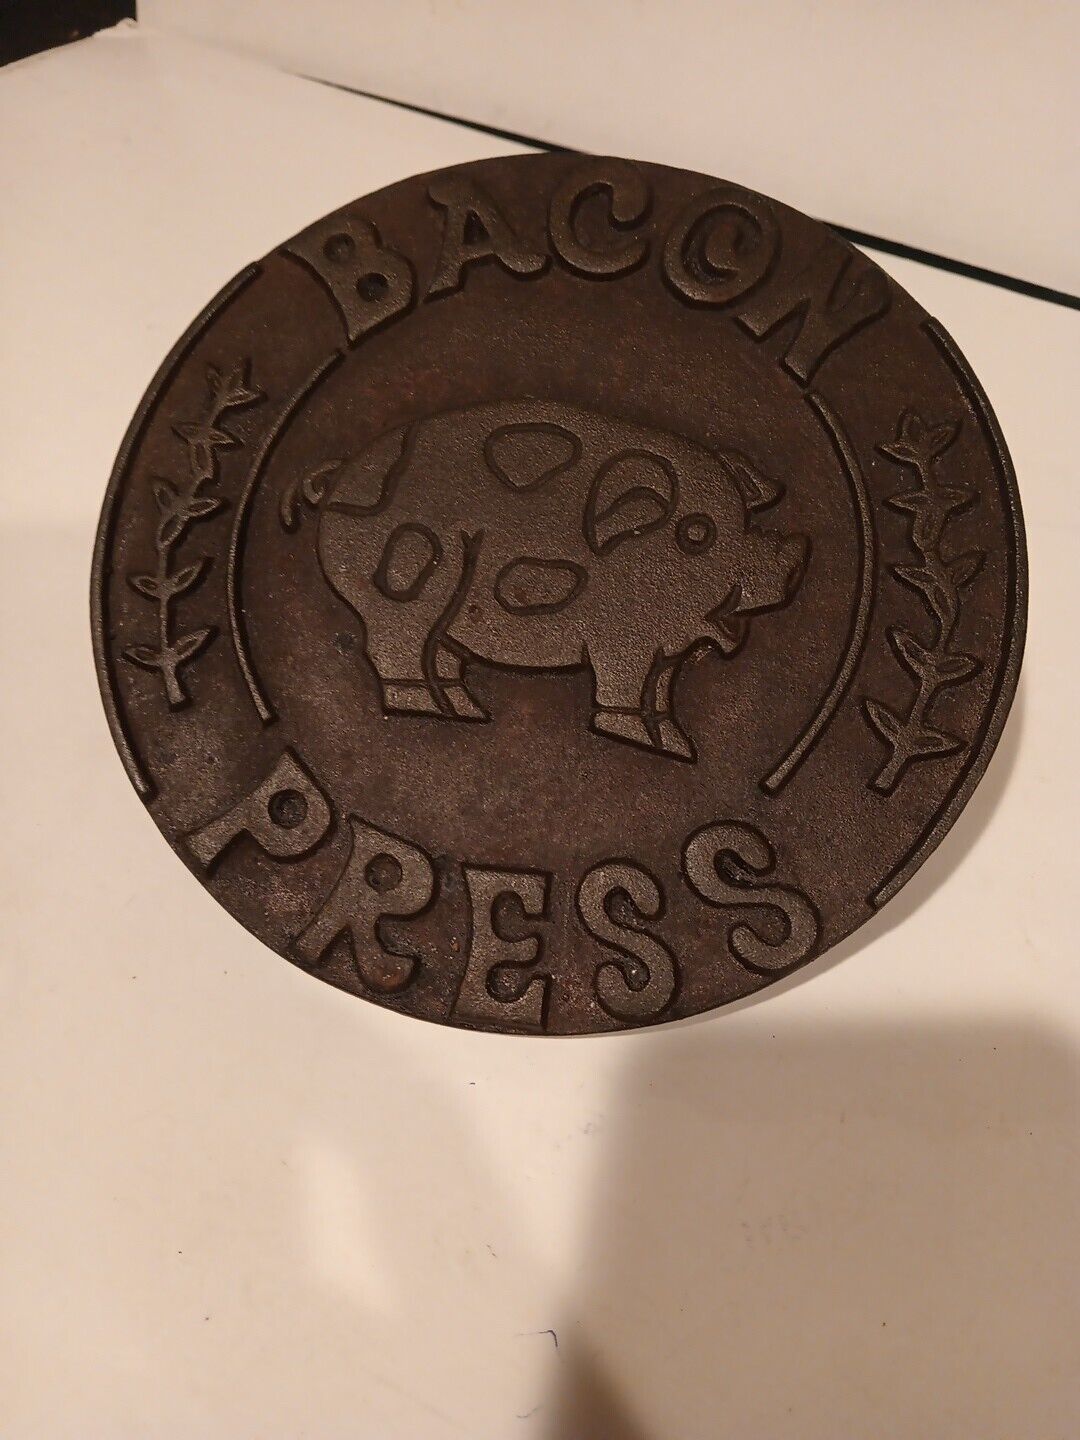 Vintage Bacon Press-Heavy Cast Iron. Wooden Handle. Pig Design. Looks/Works Nice